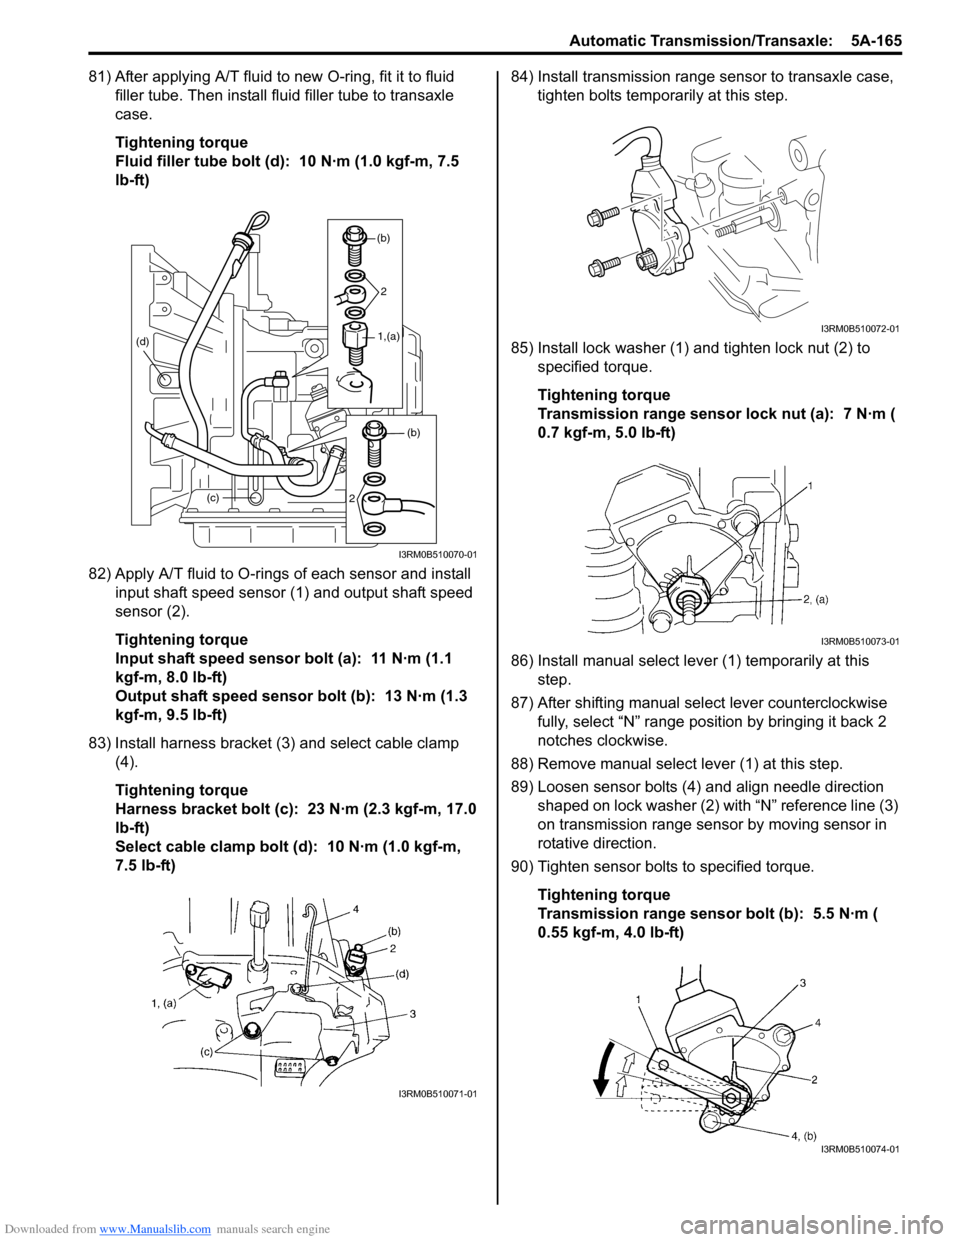 SUZUKI SWIFT 2006 2.G Service Workshop Manual Downloaded from www.Manualslib.com manuals search engine Automatic Transmission/Transaxle:  5A-165
81) After applying A/T fluid to new O-ring, fit it to fluid filler tube. Then install fl uid filler t